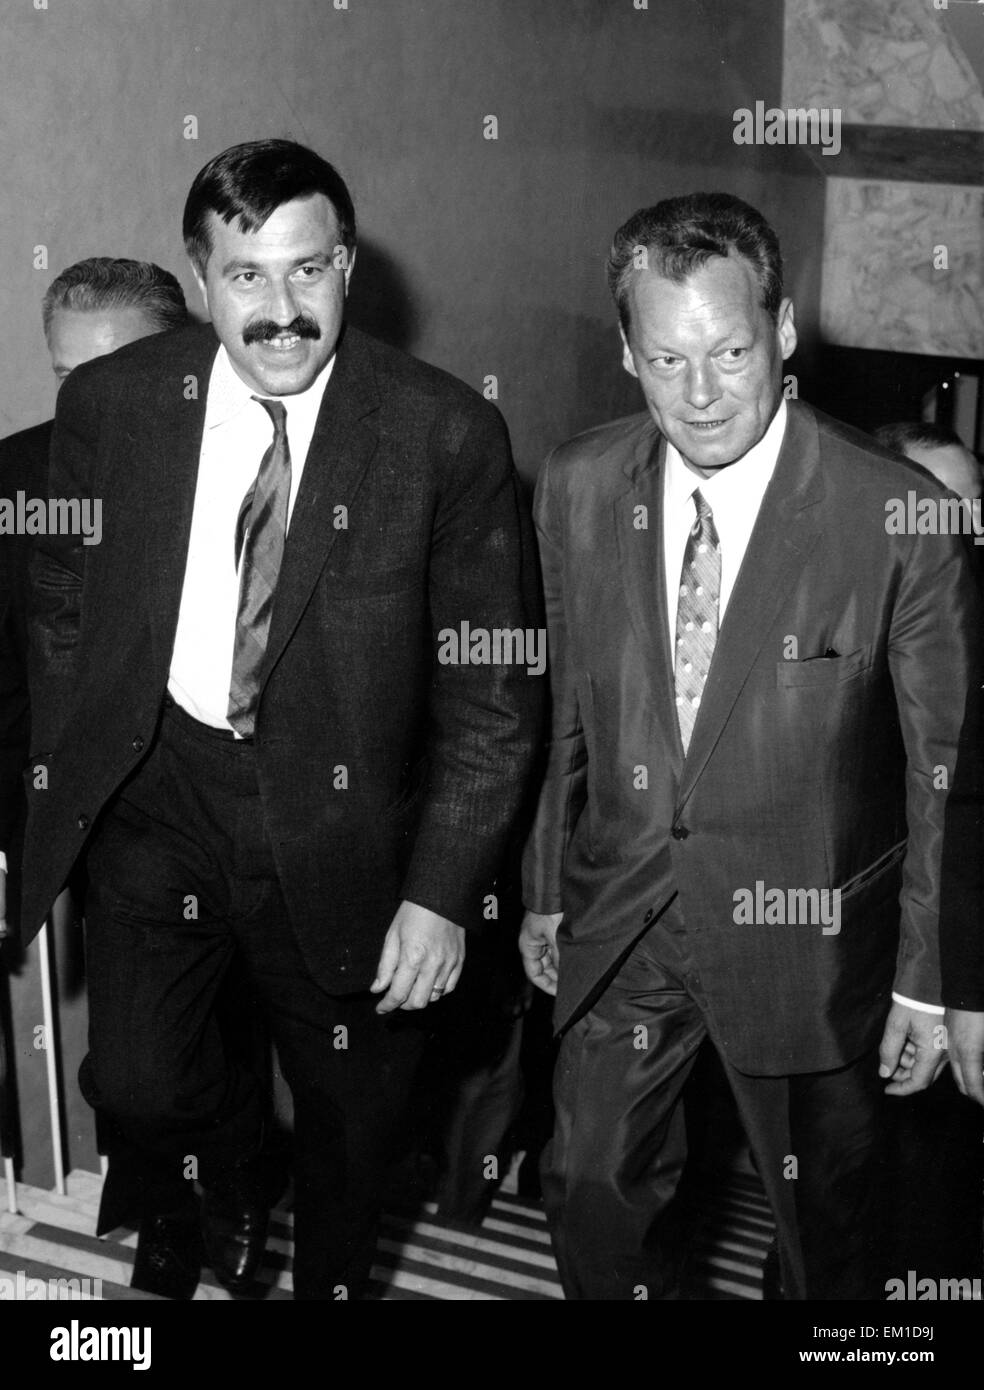 (FILE) - An archive picture, dated 4 September 1965, shows German author Guenter Grass (l) and then-German Chancellor candidate Willy Brandt (SPD) on their way to a reception in Bayreuth, Germany. Goettingen-based publishing house Steidl confirmed on 13 April 2015 the death of Guenther Grass. Photo: Heinz-Juergen Goettert/dpa Stock Photo